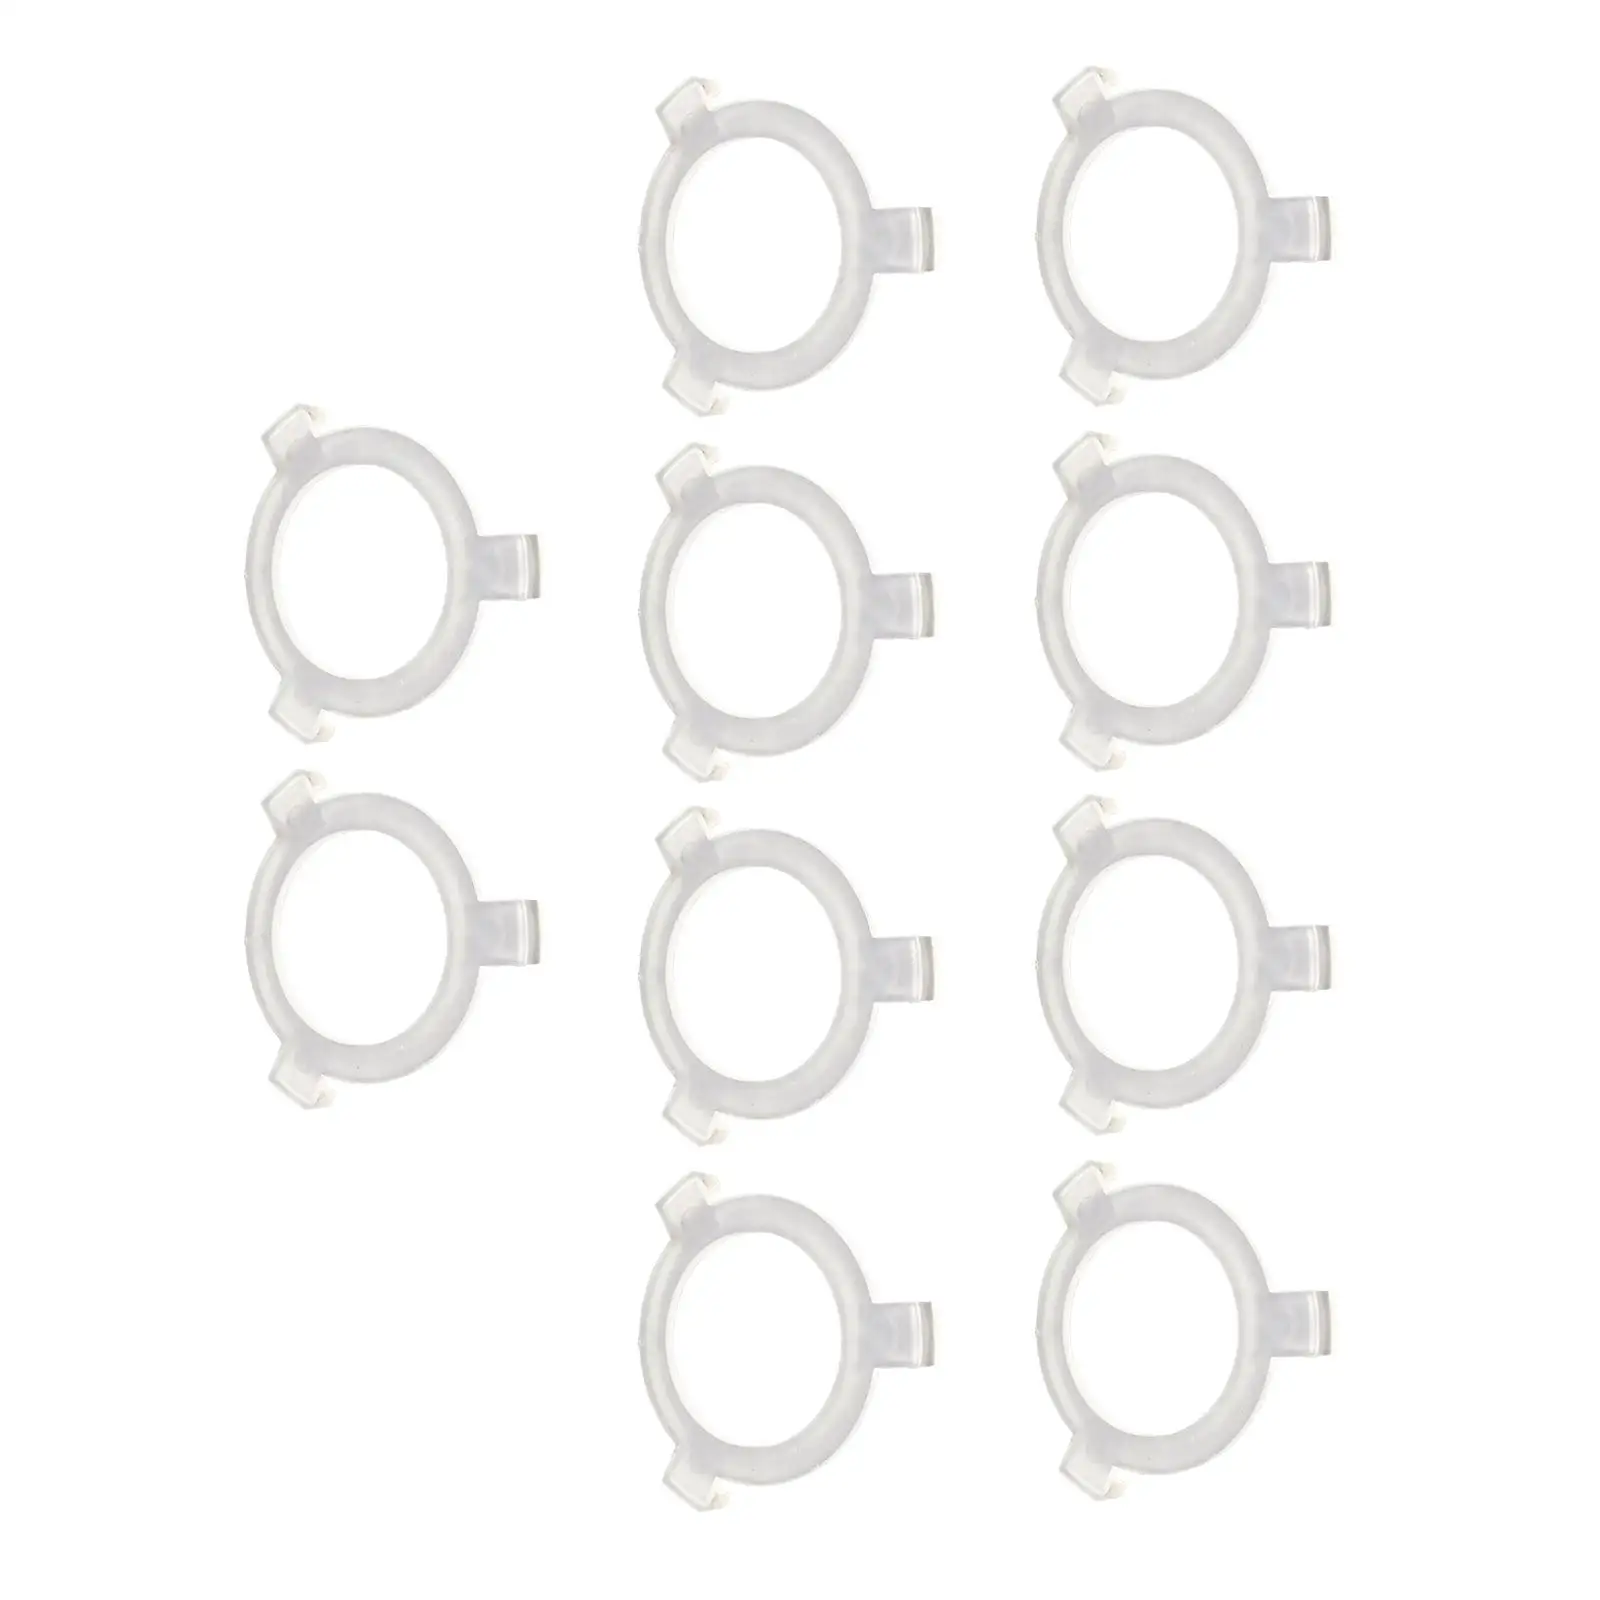 10pcs E27 To E26 Lampshade Reducing Rings Adapter Converters Lamp Socket Holder Light Accessories